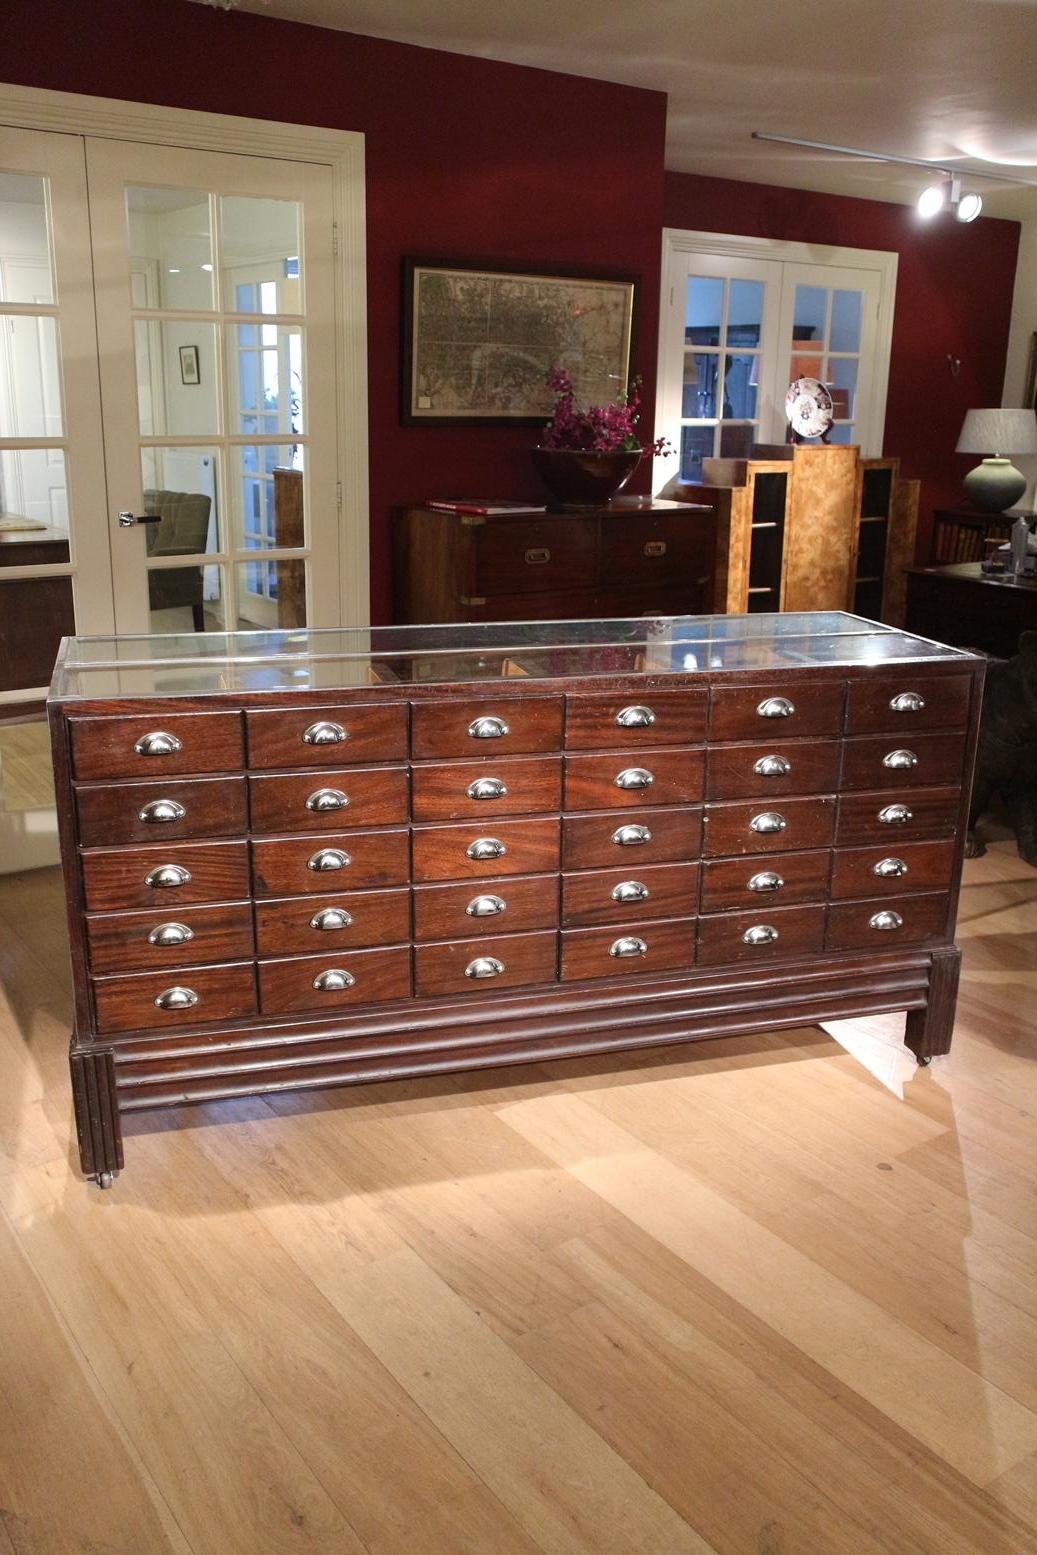 Special Art Deco mahogany / chrome counter / display case with 30 drawers. Entirely in original used condition. The counter is now temporarily on wheels for easy moving. Masterpiece of its kind!
Origin: England
Period: Approx. 1930
Size: W. 183